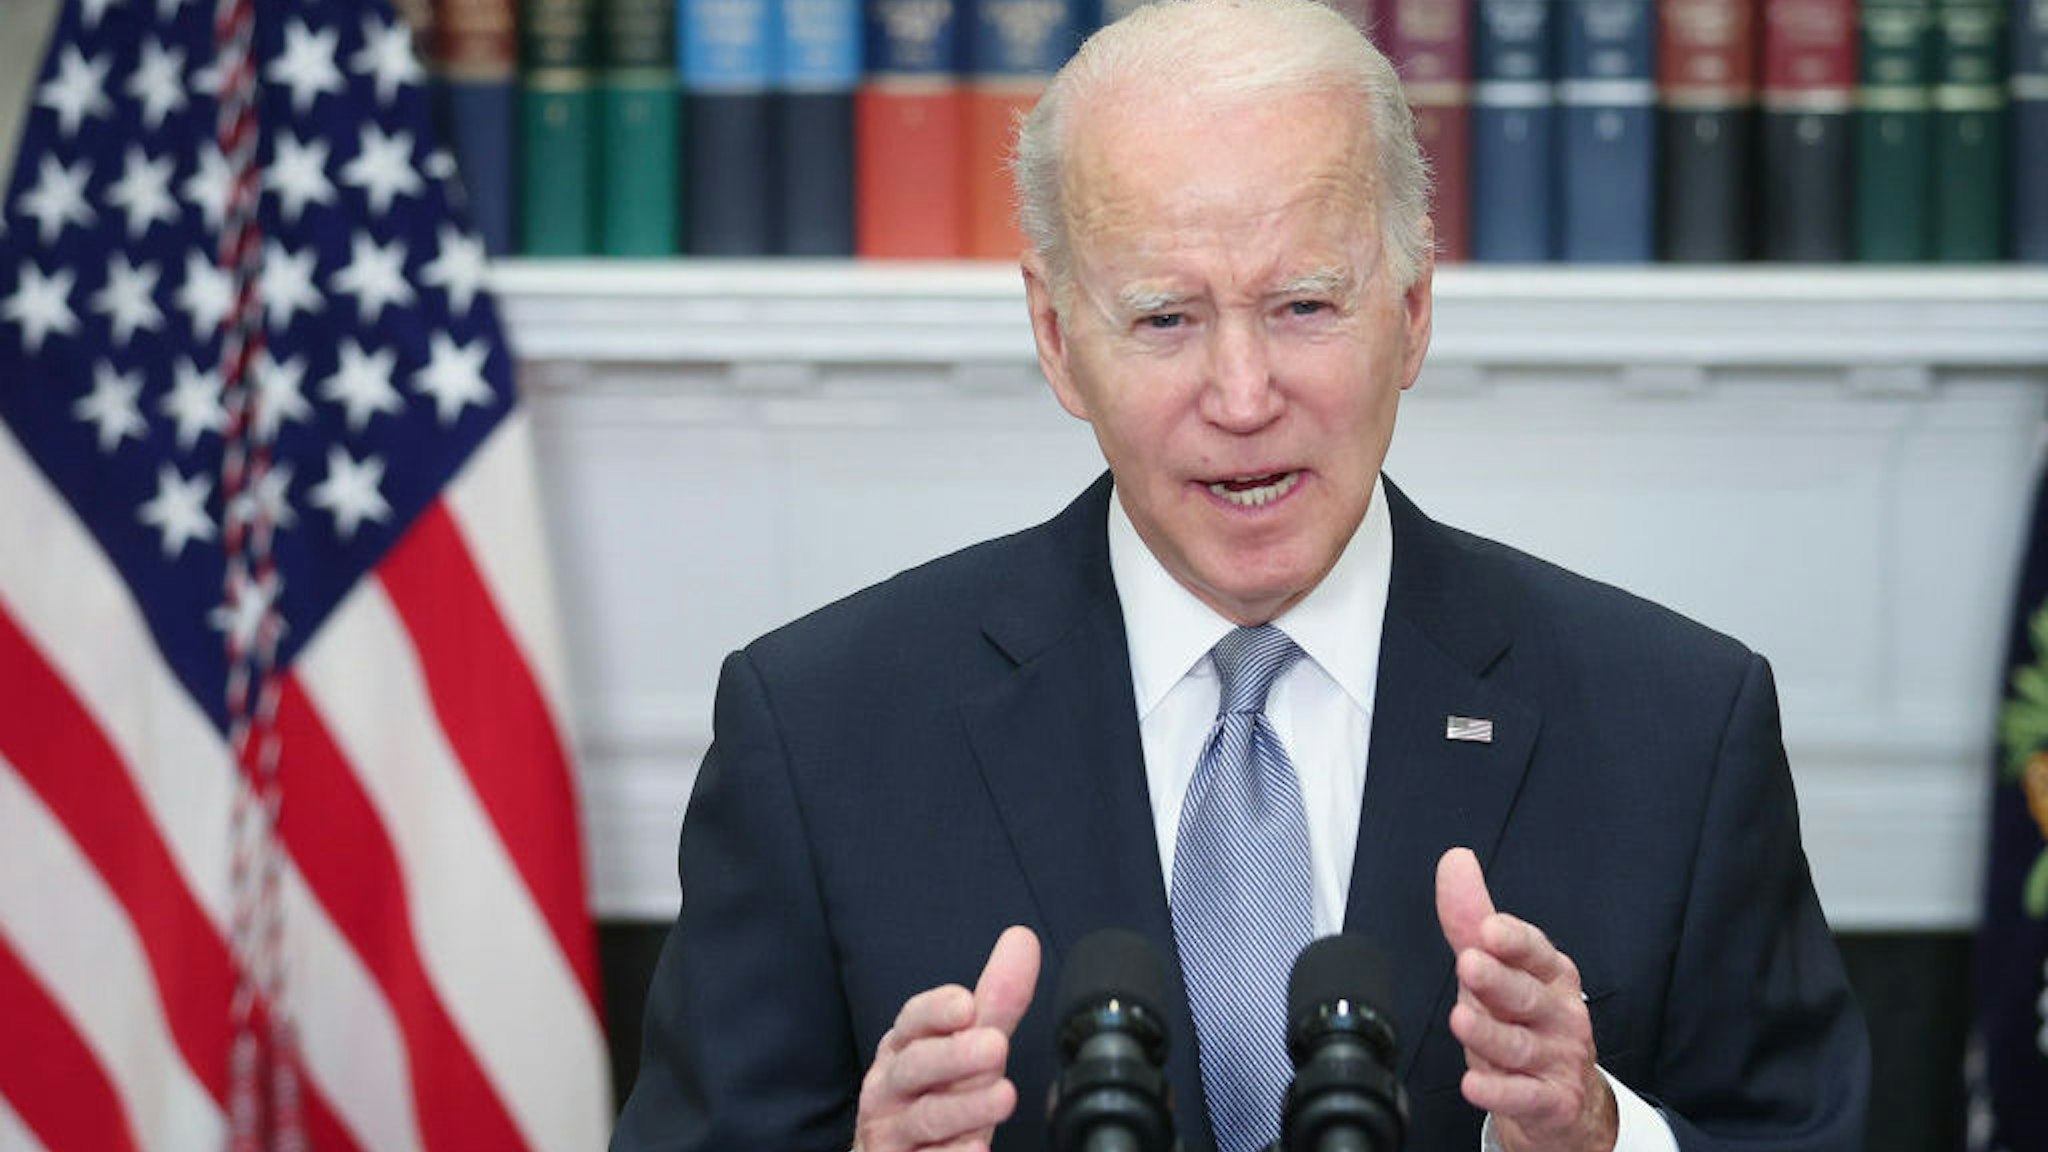 WASHINGTON, DC - APRIL 21: U.S. President Joe Biden delivers remarks on Russia and Ukraine from the Roosevelt Room of the White House April 21, 2022 in Washington, DC. Biden announced an additional $800 million in military aid to Ukraine during his remarks. (Photo by Win McNamee/Getty Images)